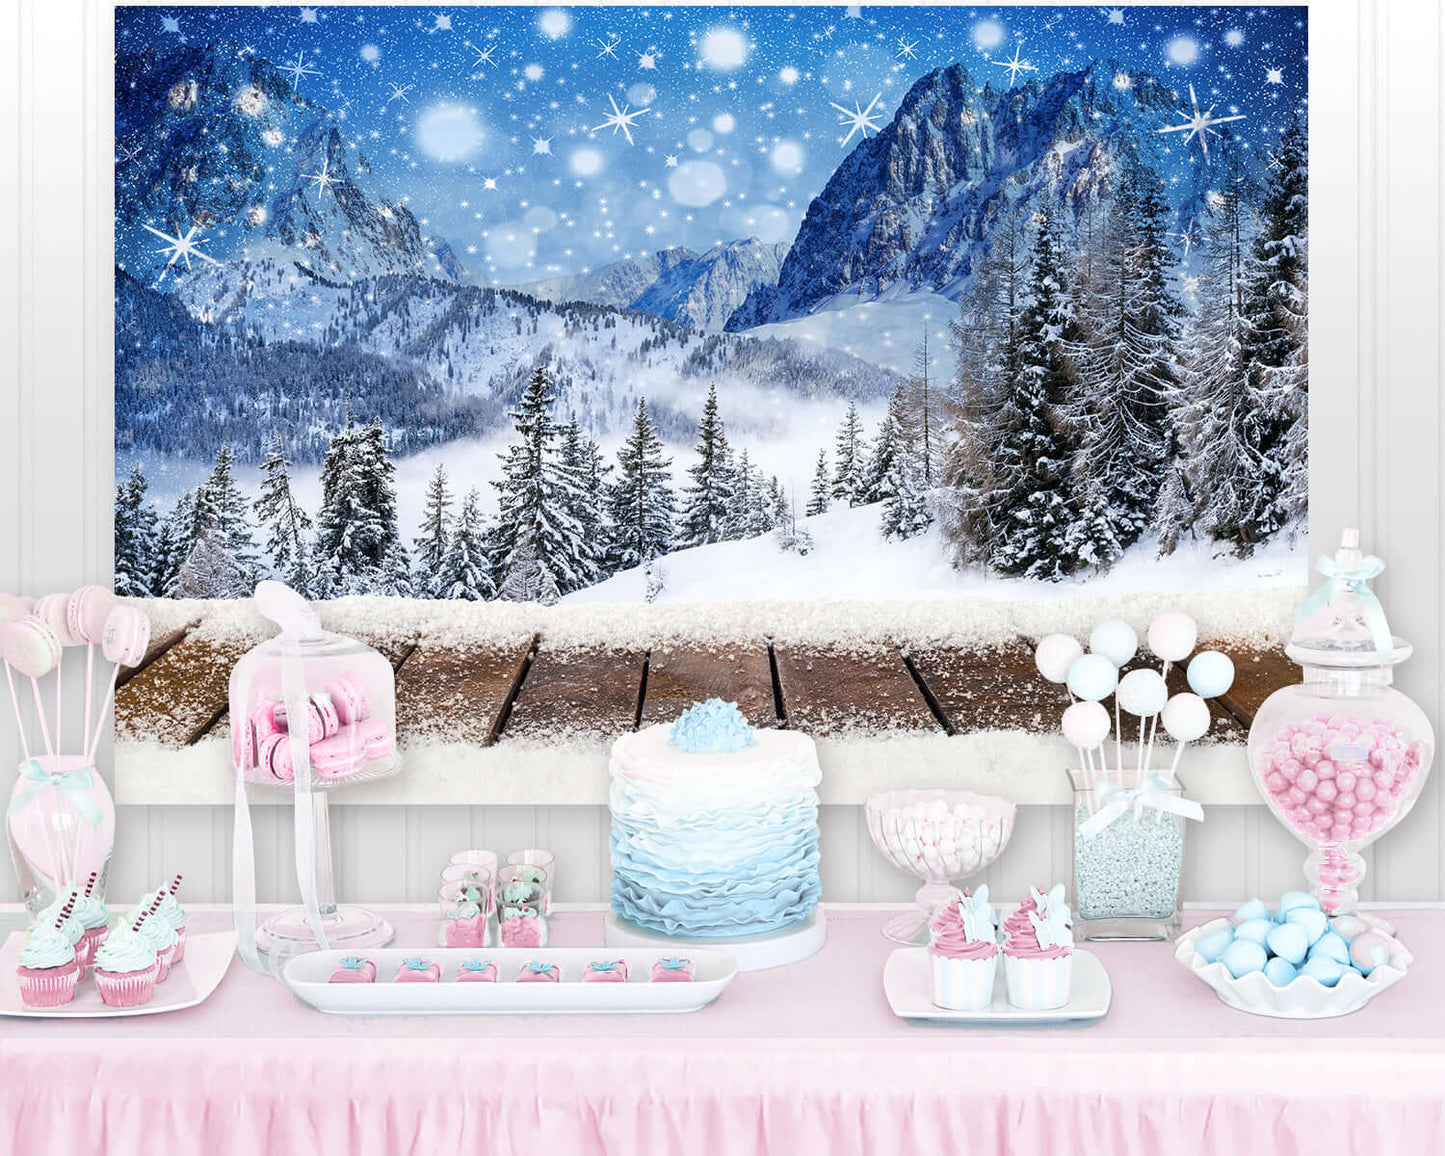 Dreamy Winter Forest Snow Night Christmas Village Nature Landscape Decro Scenic Photography Backdrops For Photozone